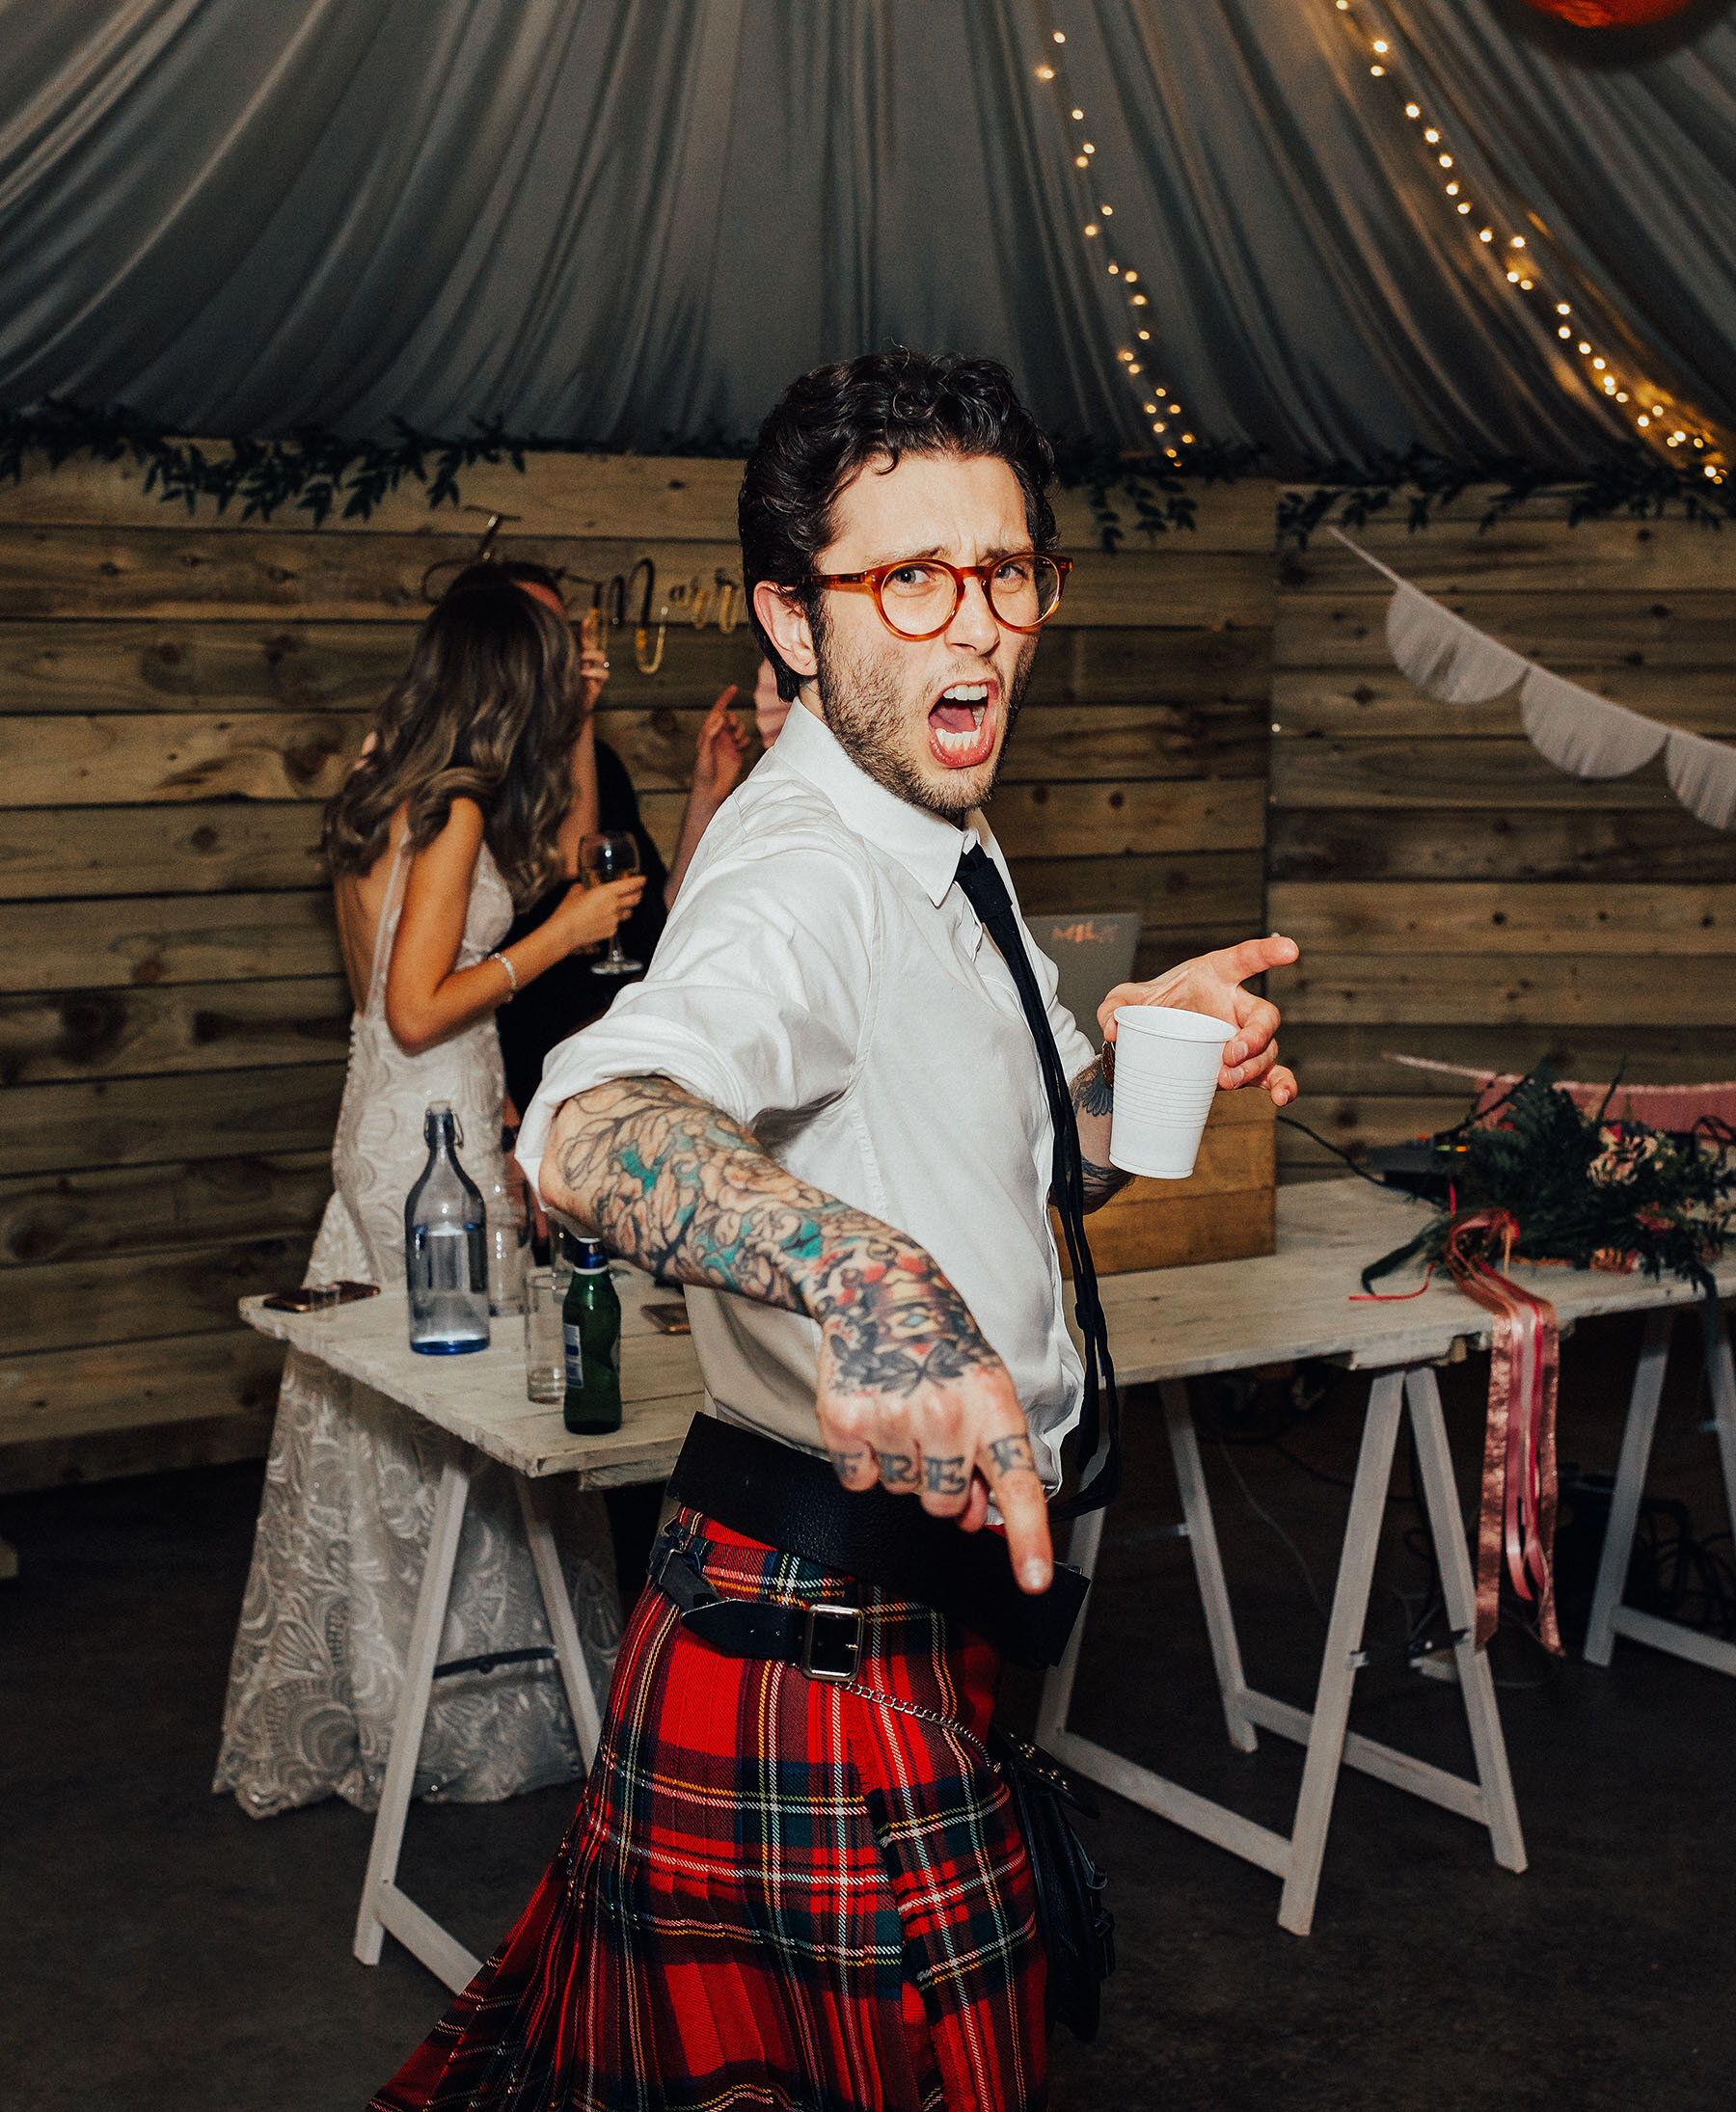 COW_SHED_CRAIL_WEDDING_PJ_PHILLIPS_PHOTOGRAPHY_174.jpg